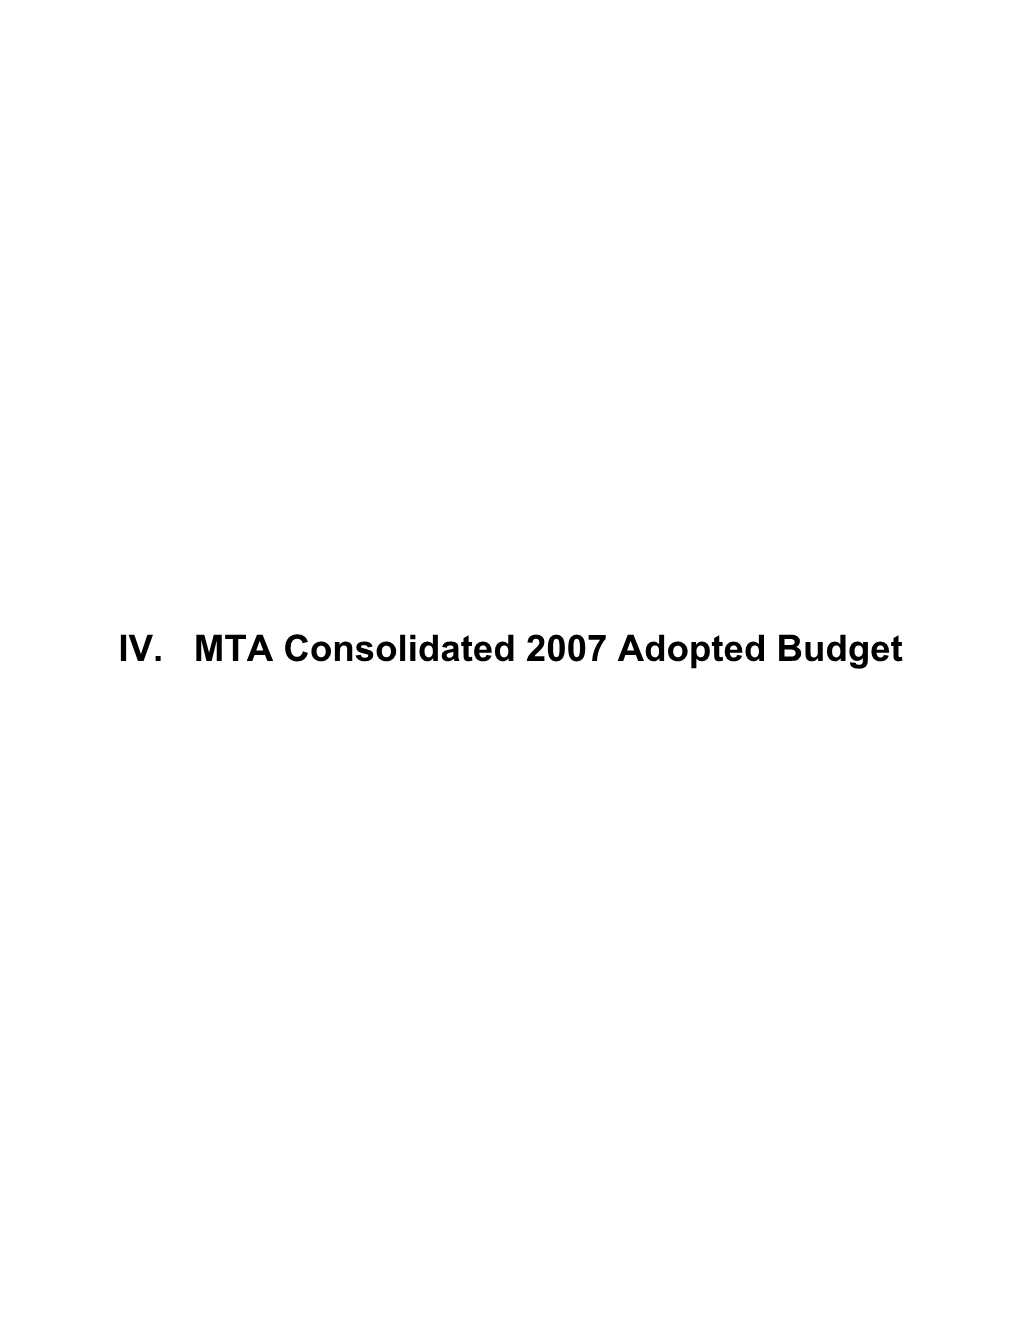 MTA 2007 Adopted Budget, February Financial Plan 2007-2010